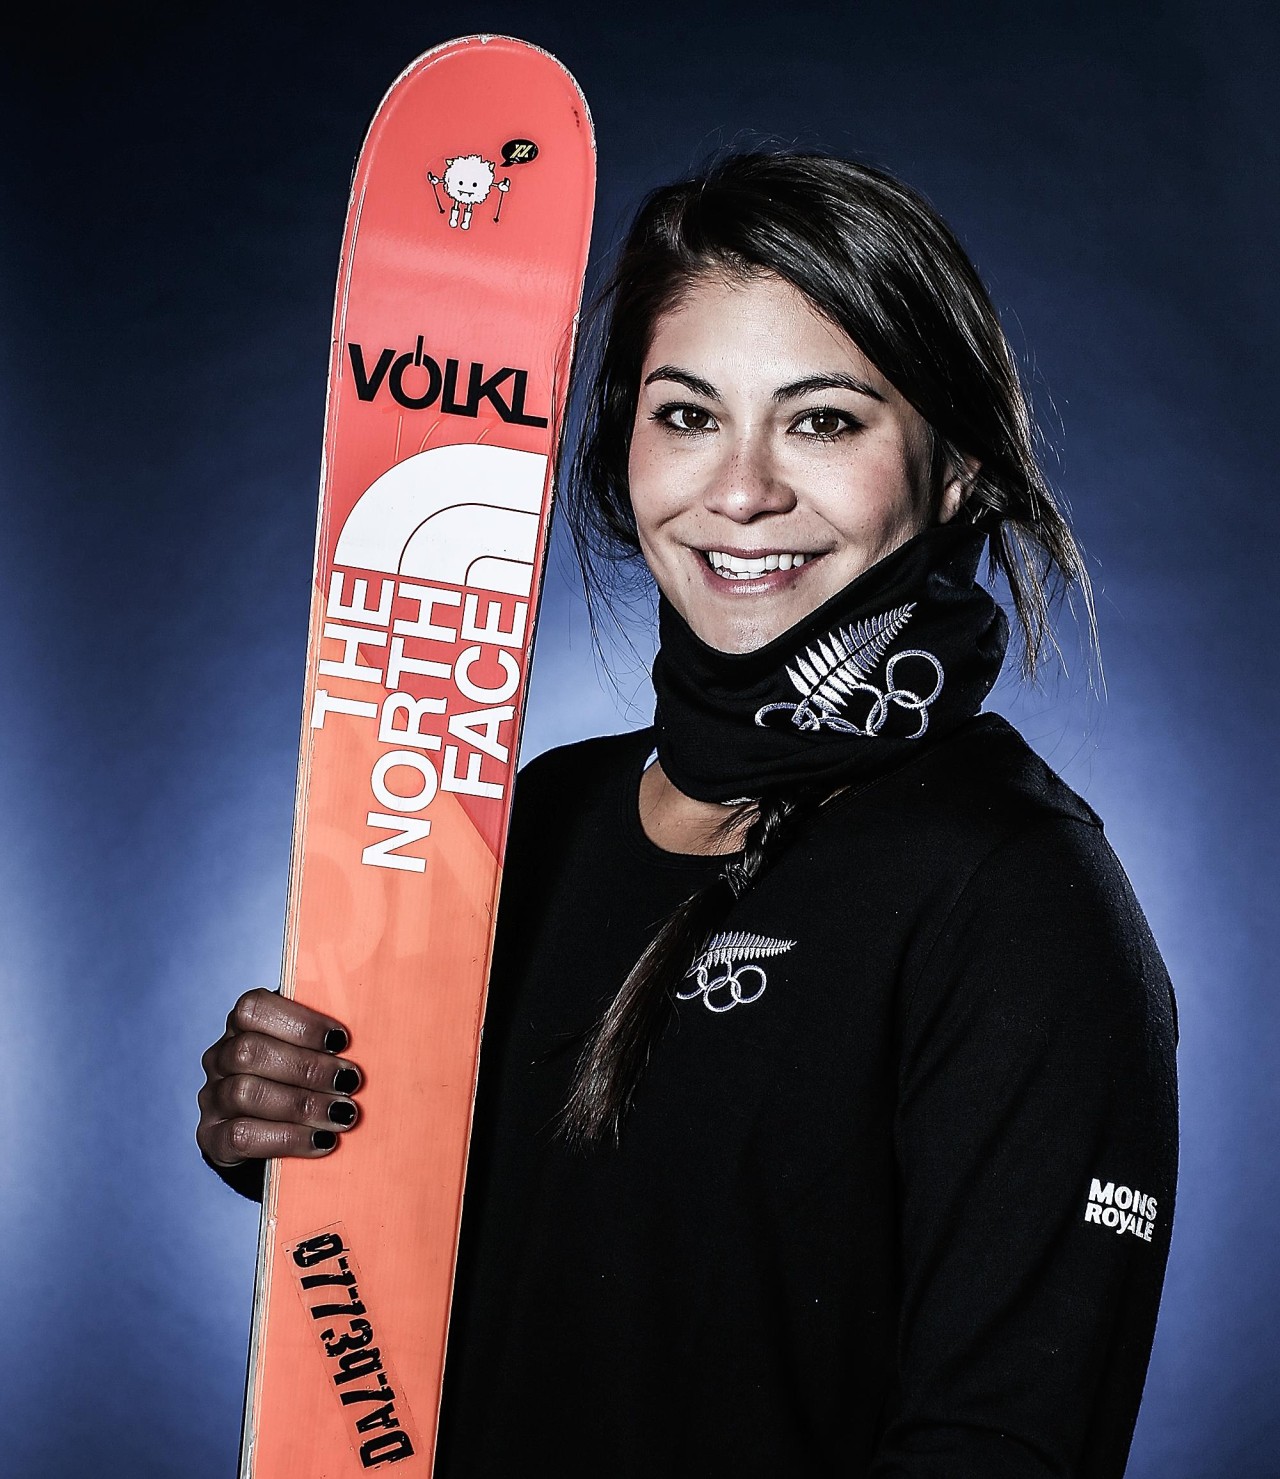 Janina Kuzma is a freeride skier based in Wanaka. She is New Zealand's No.1 halfpipe skier and has qualified for the 2018 Winter Olympics in PyeongChang, South Korea. She is also NZ's best female big mountain skier. 